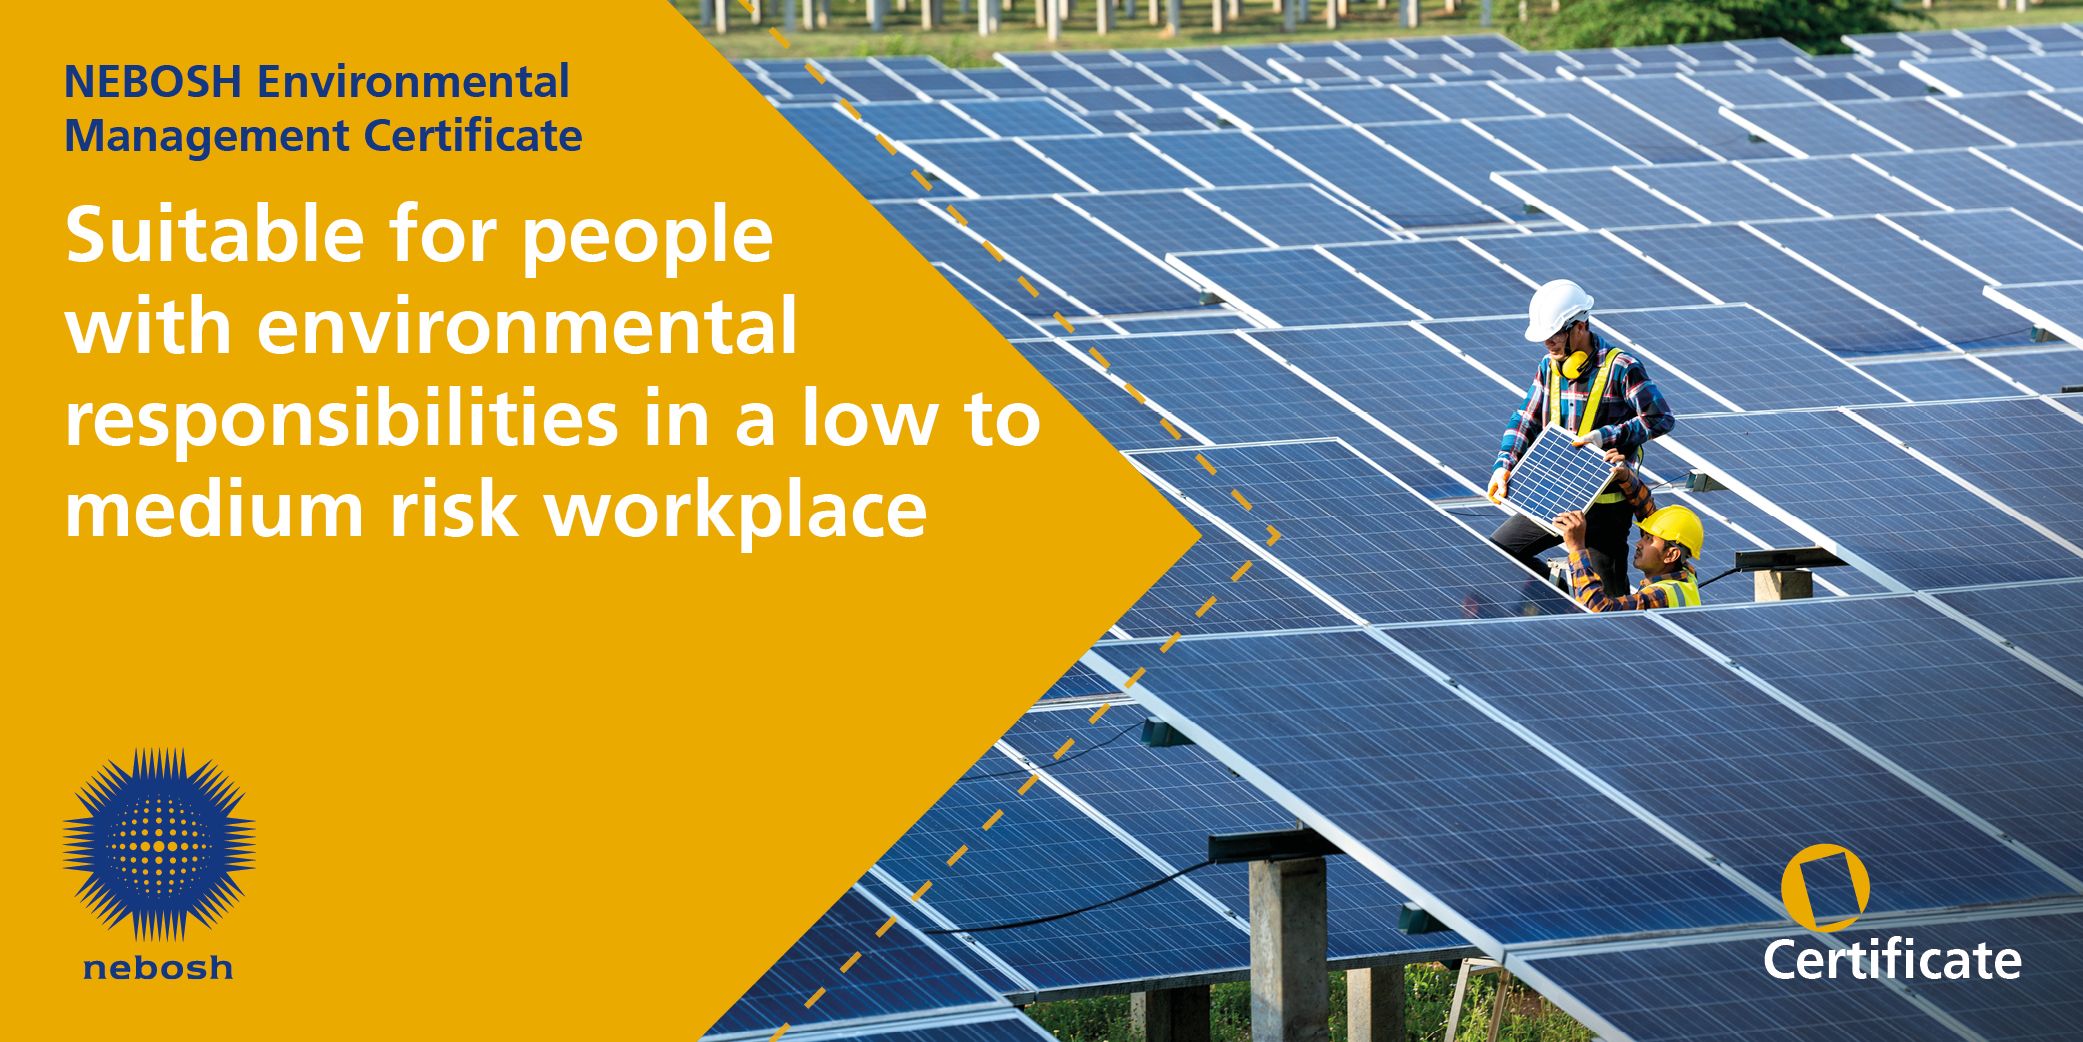 Be part of a sustainable future with the NEBOSH Environmental Management Certificate